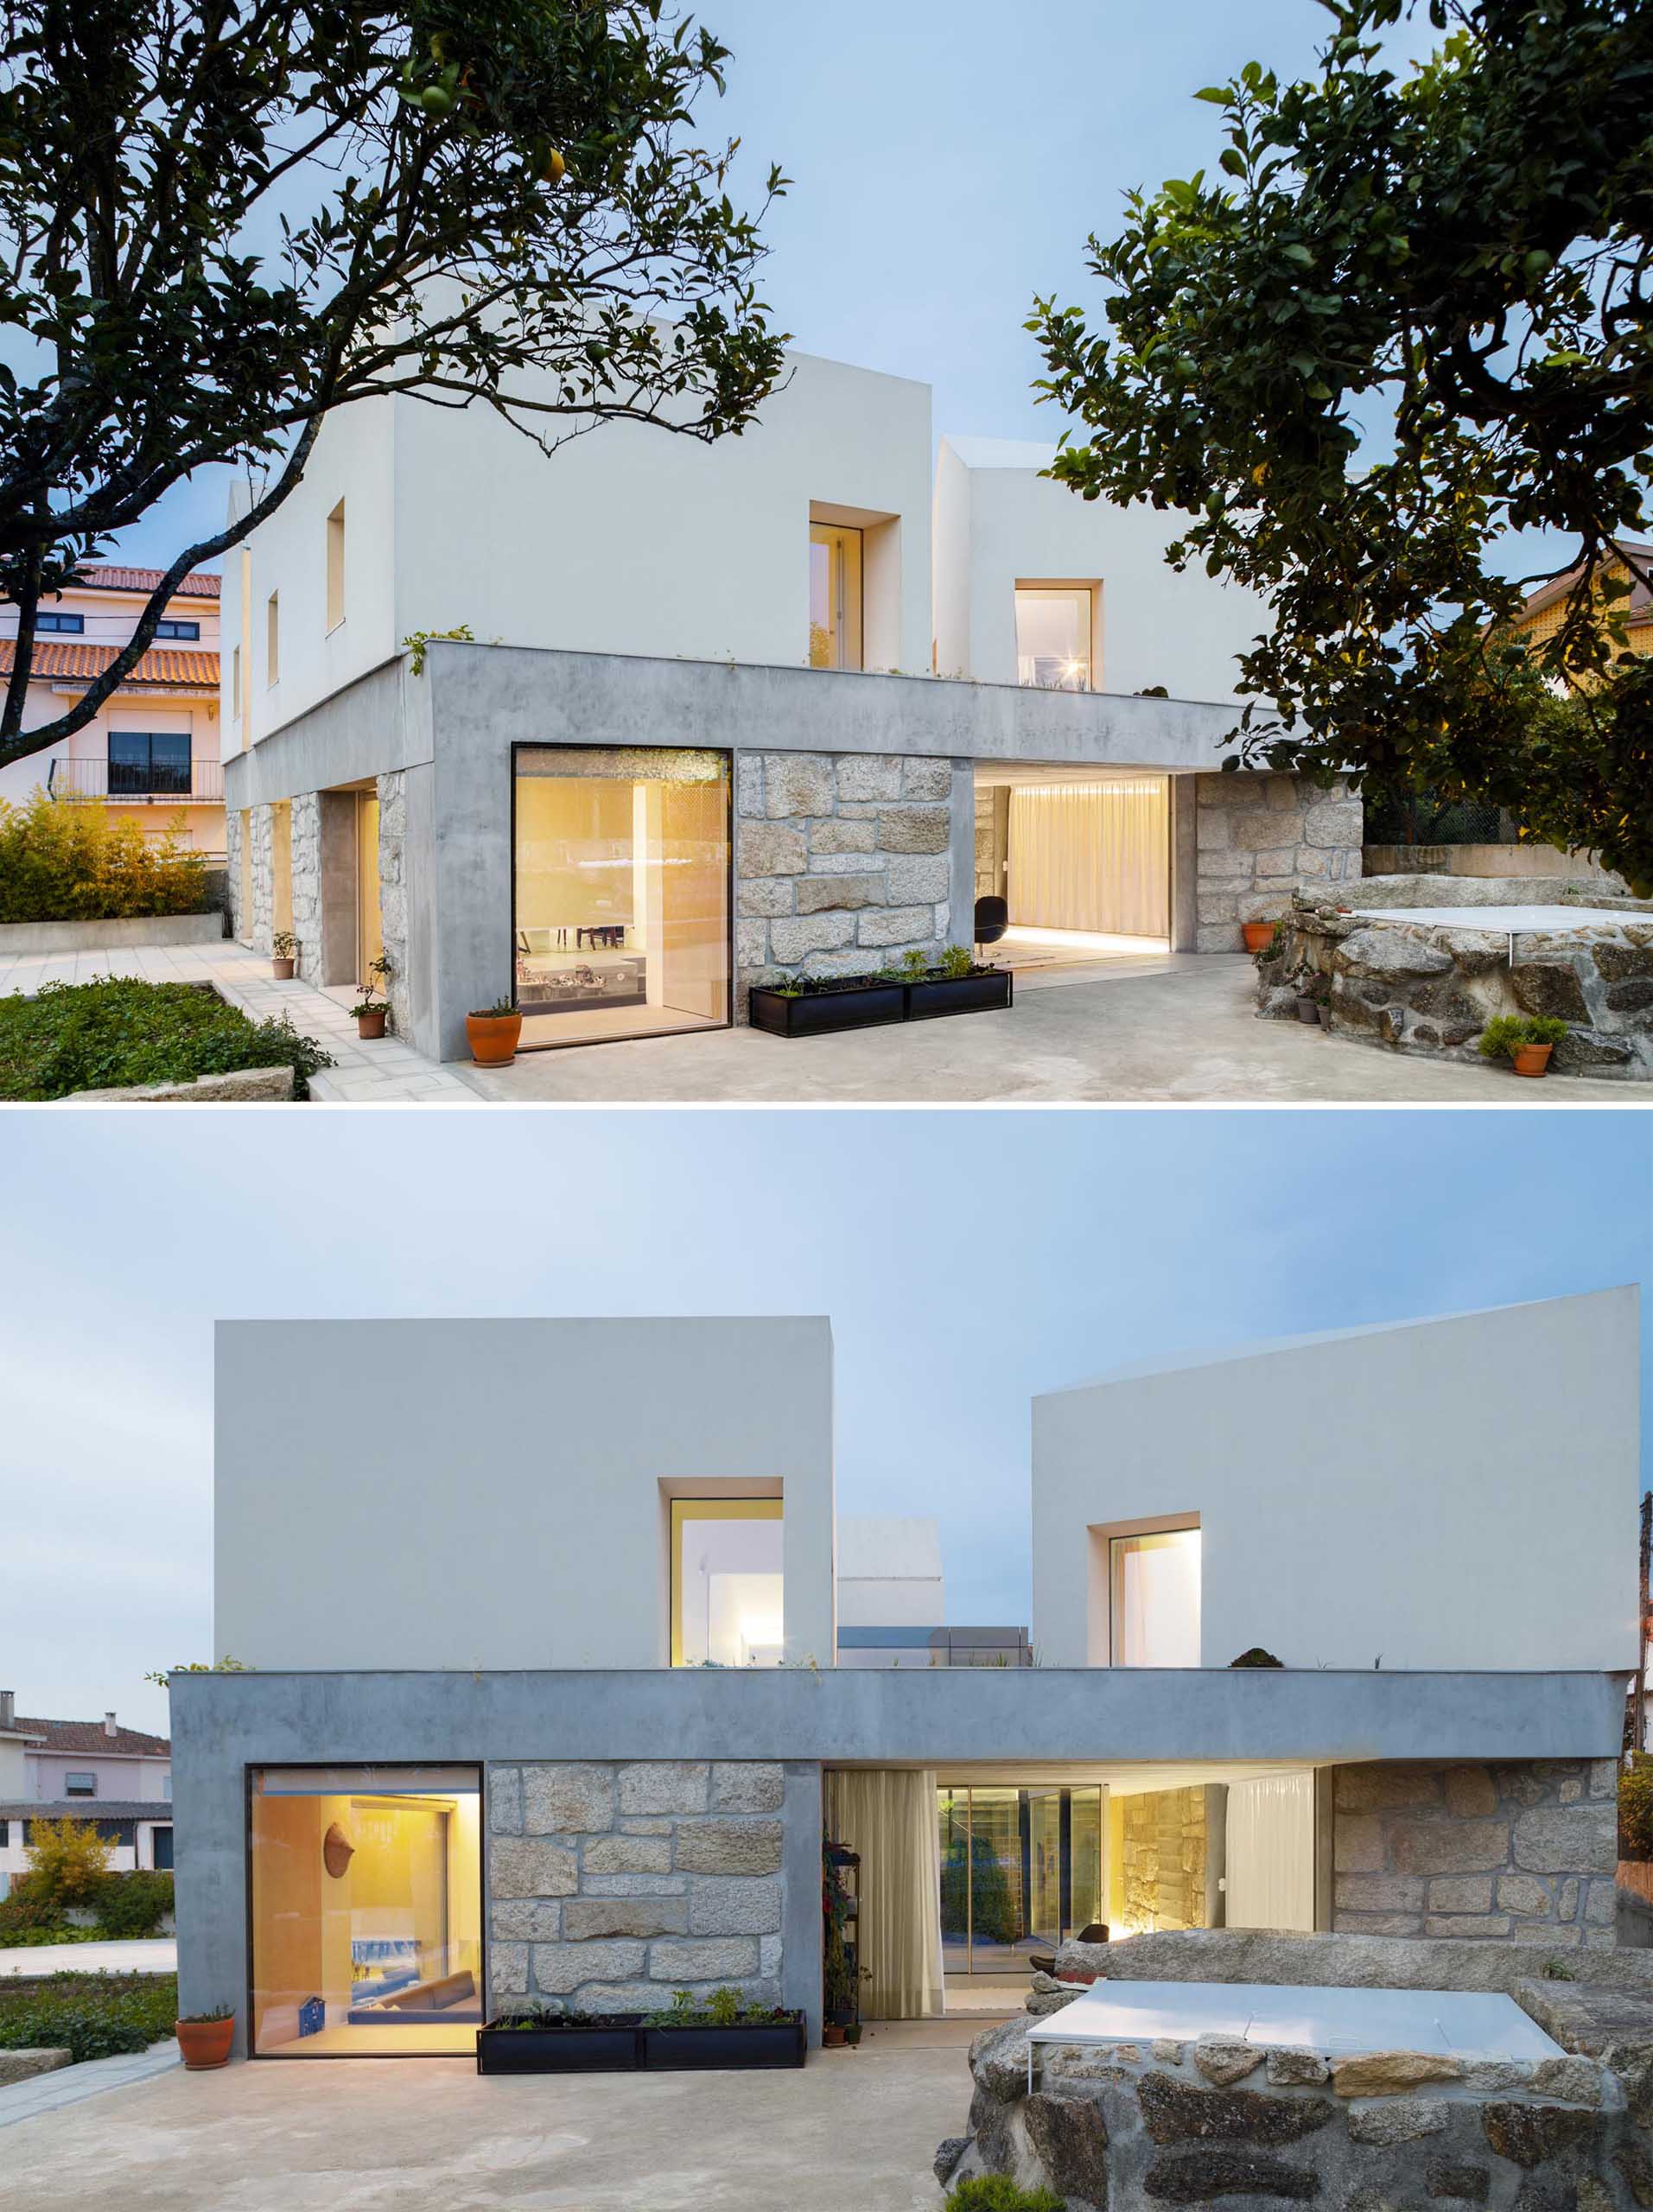 A concrete slab separates the stone walls and white upper portion of this modern home.